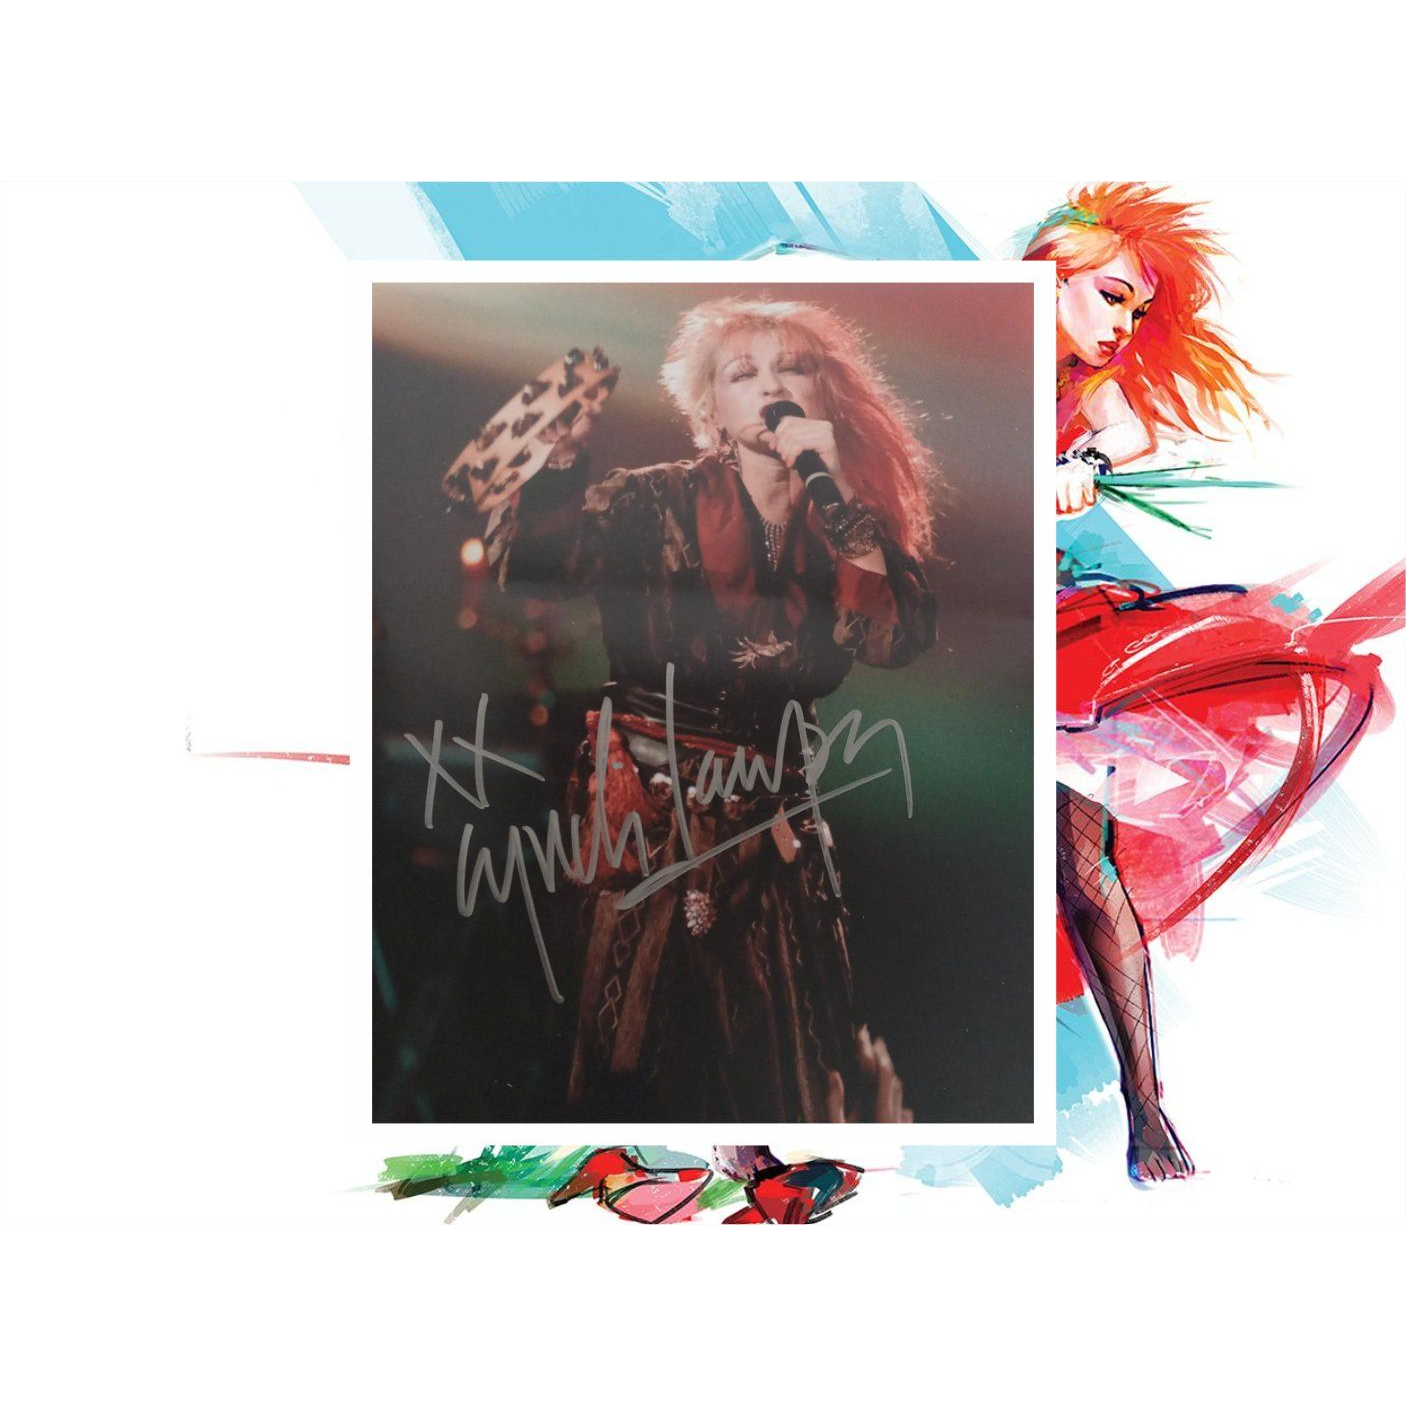 Cindy Lauper 8 by 10 photo signed with proof